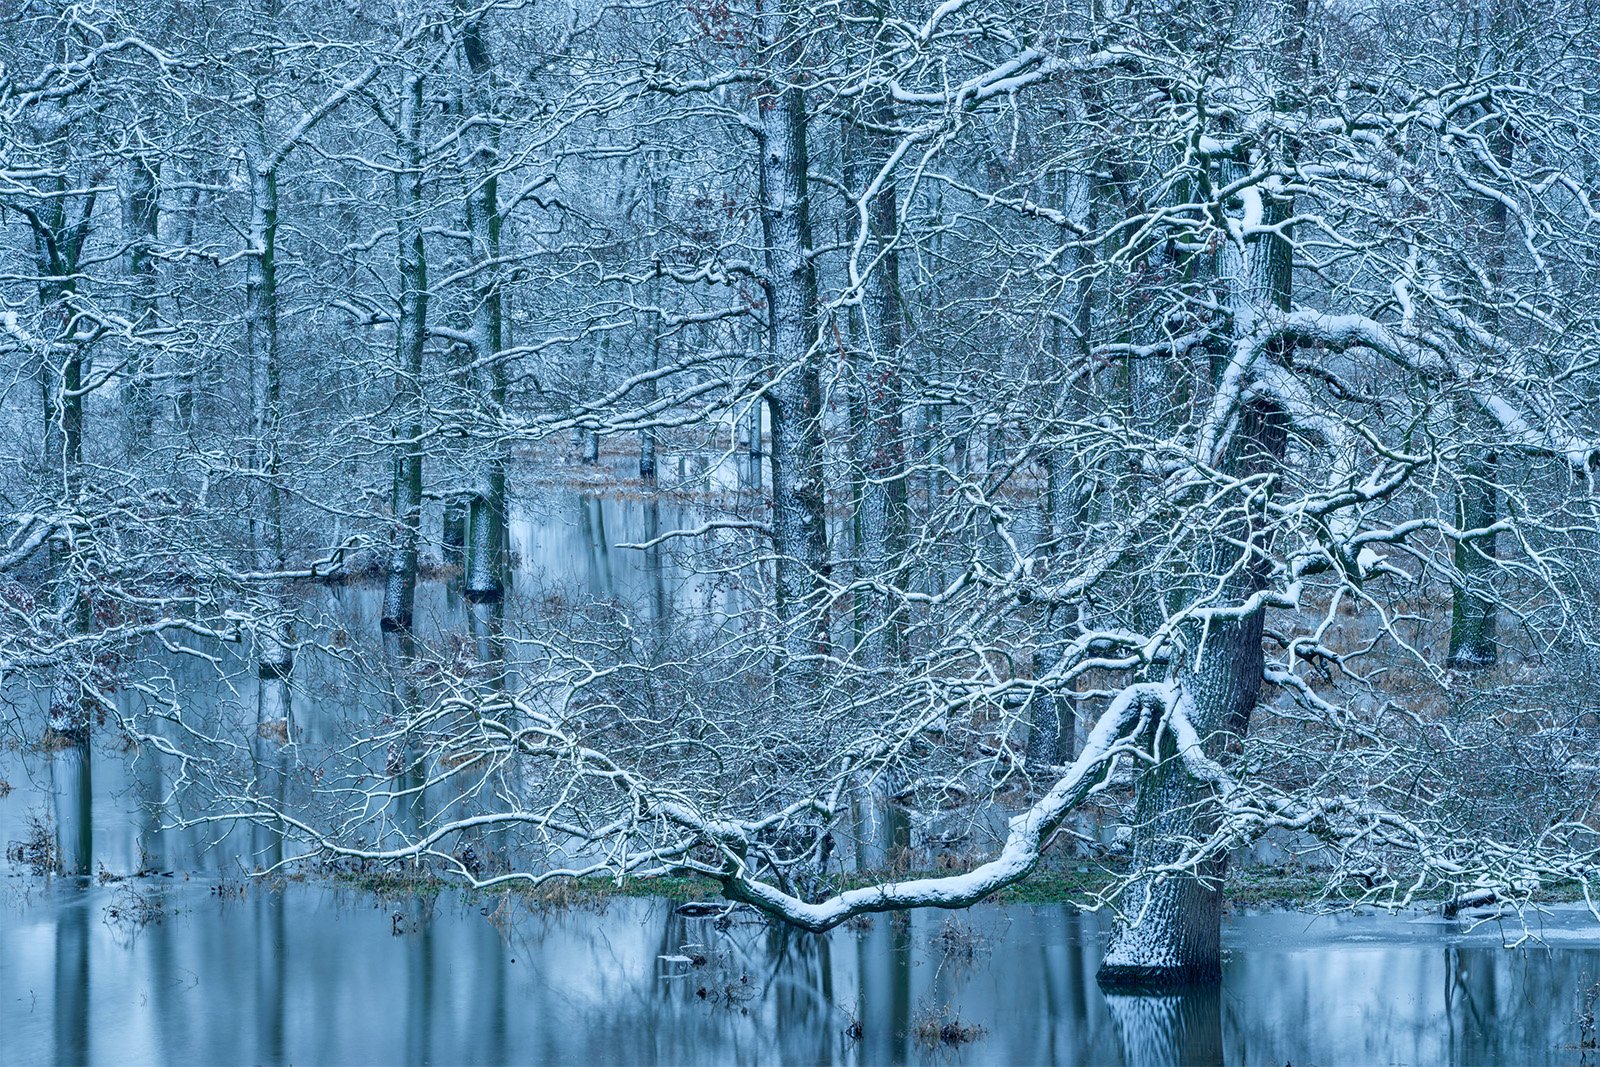 A serene, snowy forest surrounds a calm, semi-frozen lake. Bare trees, covered in a light layer of snow, mirror off the water's surface. The scene is tranquil and still, capturing the quiet beauty of a winter landscape.